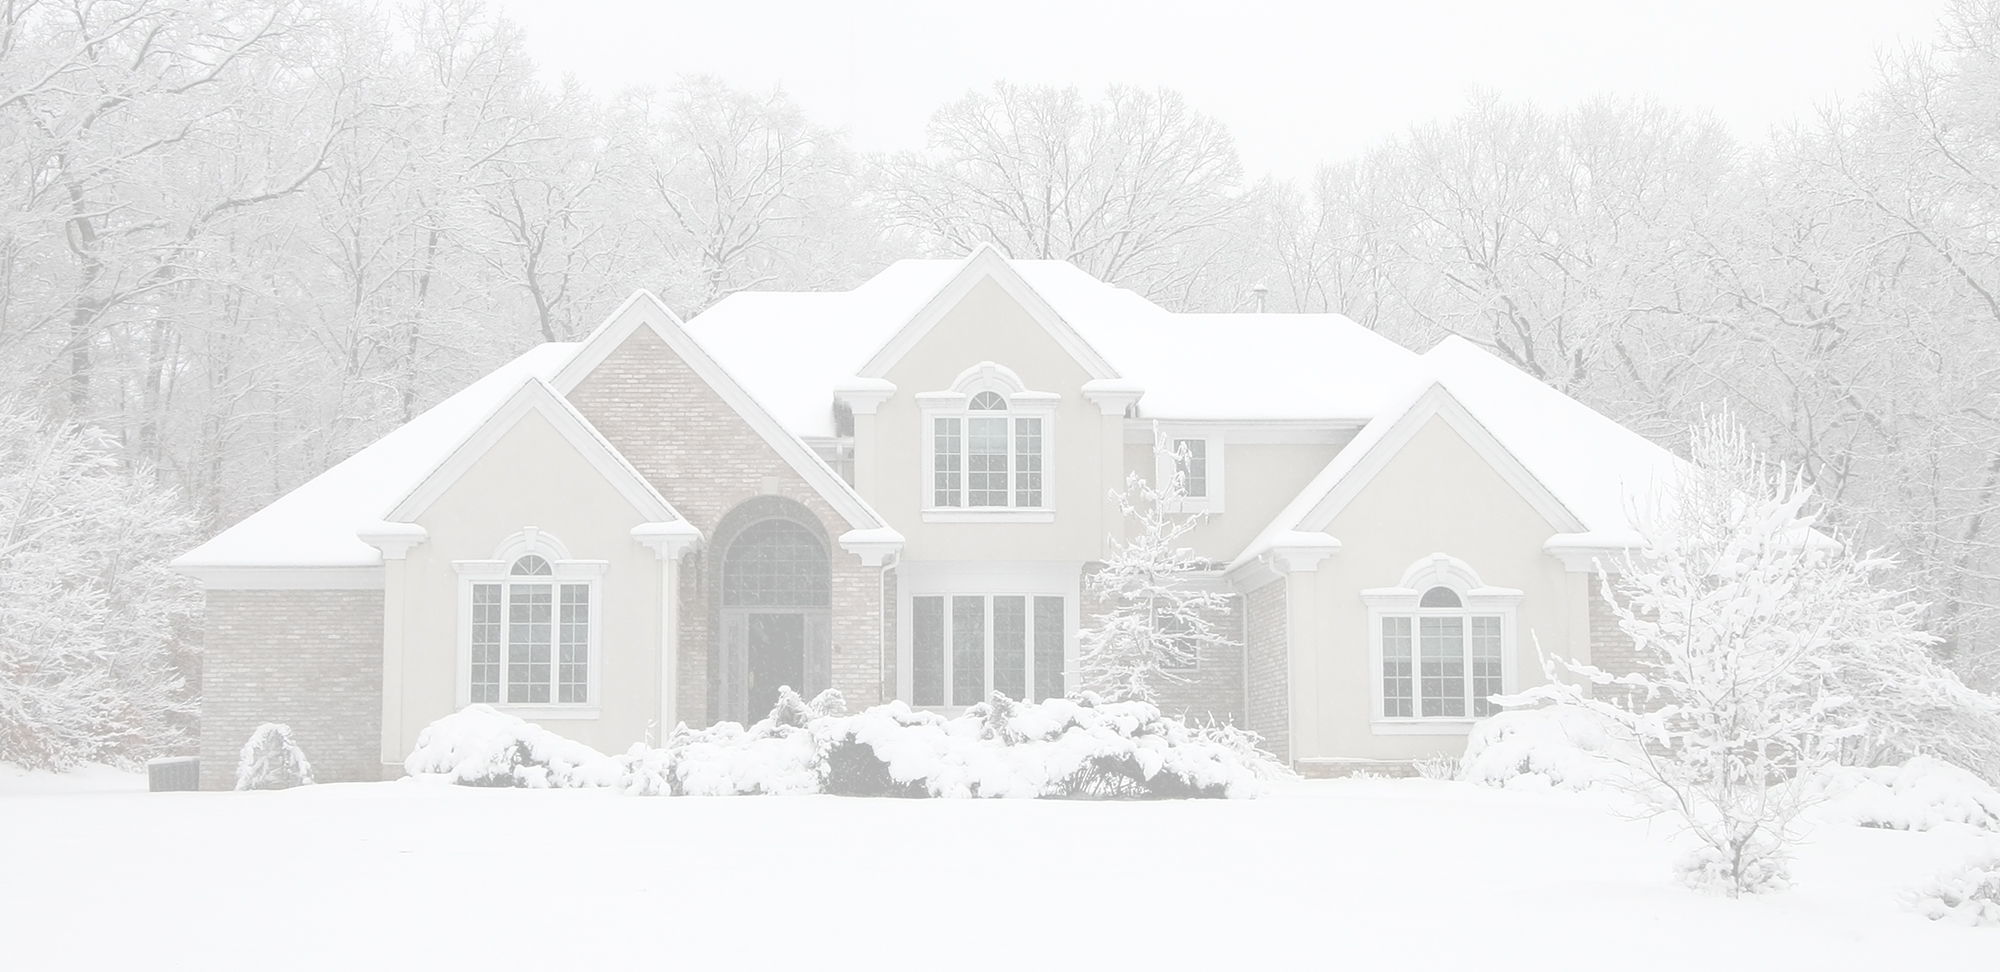 The Best Exterior Paints for Cold Winter Conditions